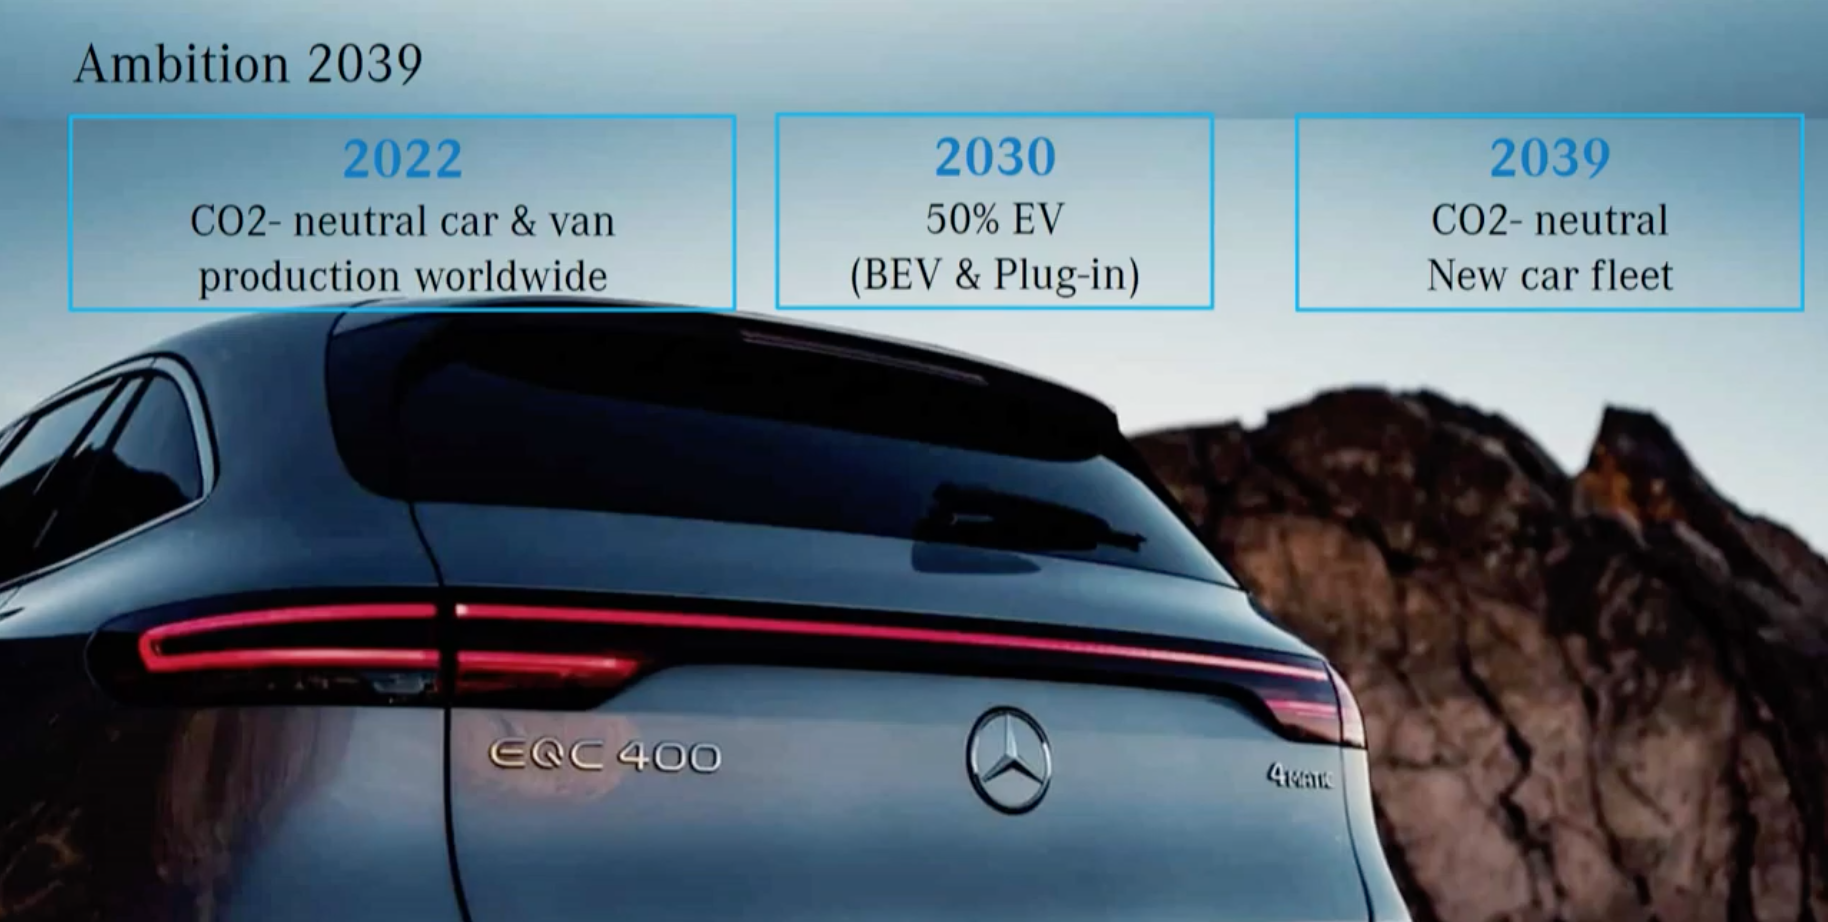 <p>Ambition 2039 - the CO2-neutral plan from Mercedes-Benz. Kicks off with CO2-neutral production from next year, a shift to EVs for half the model line-up by 2030, and onwards.</p>